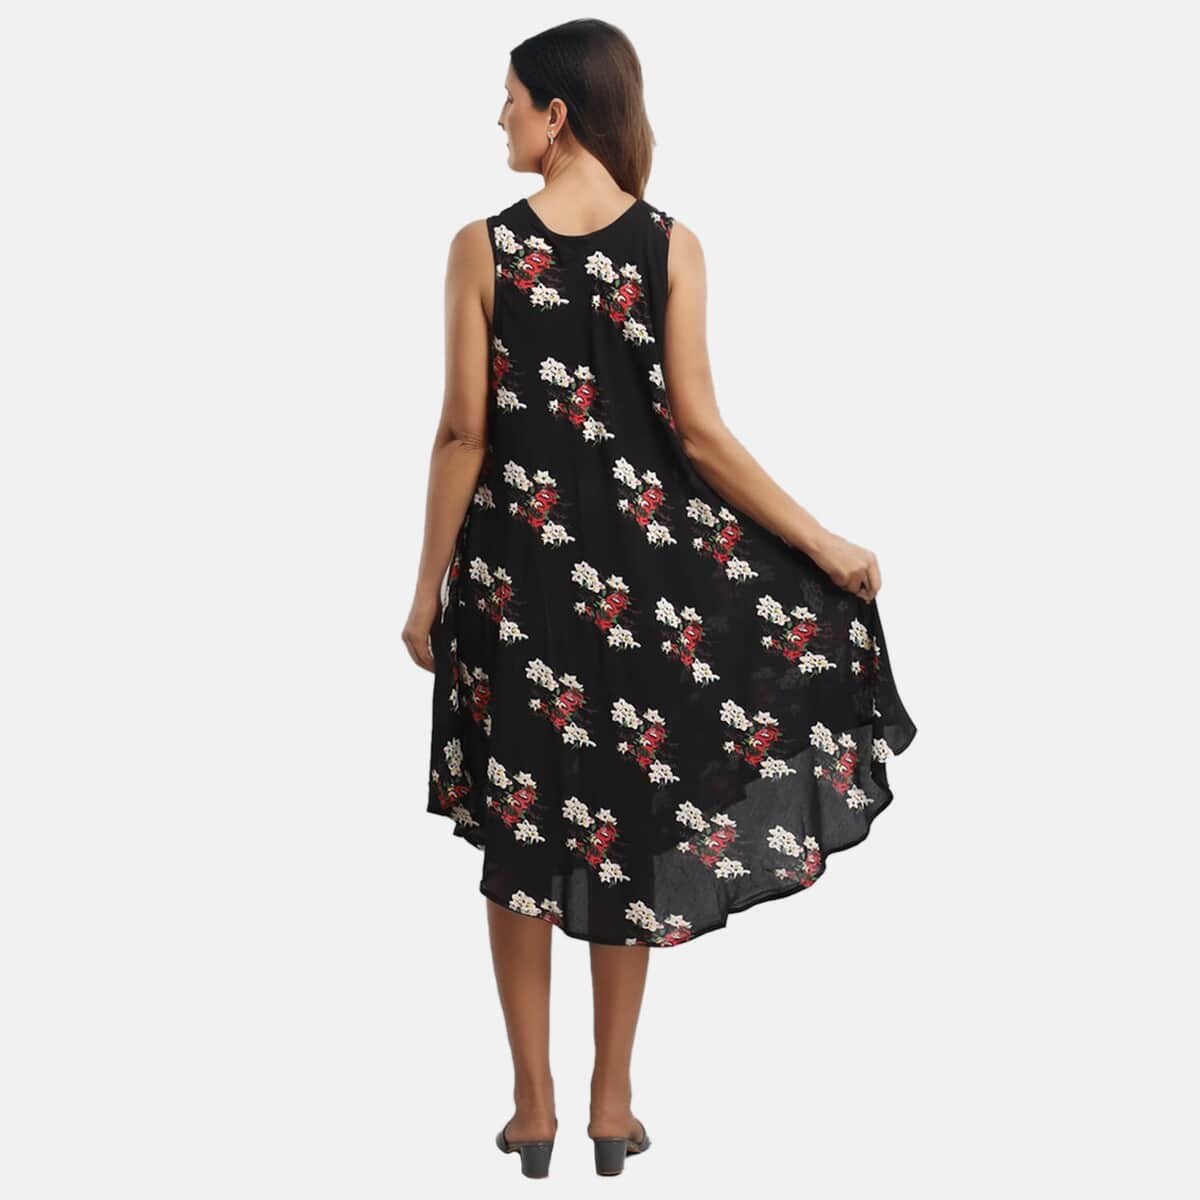 TAMSY Black Women's Repeat Floral Print Umbrella Dress -One Size Missy (44"x23") image number 2